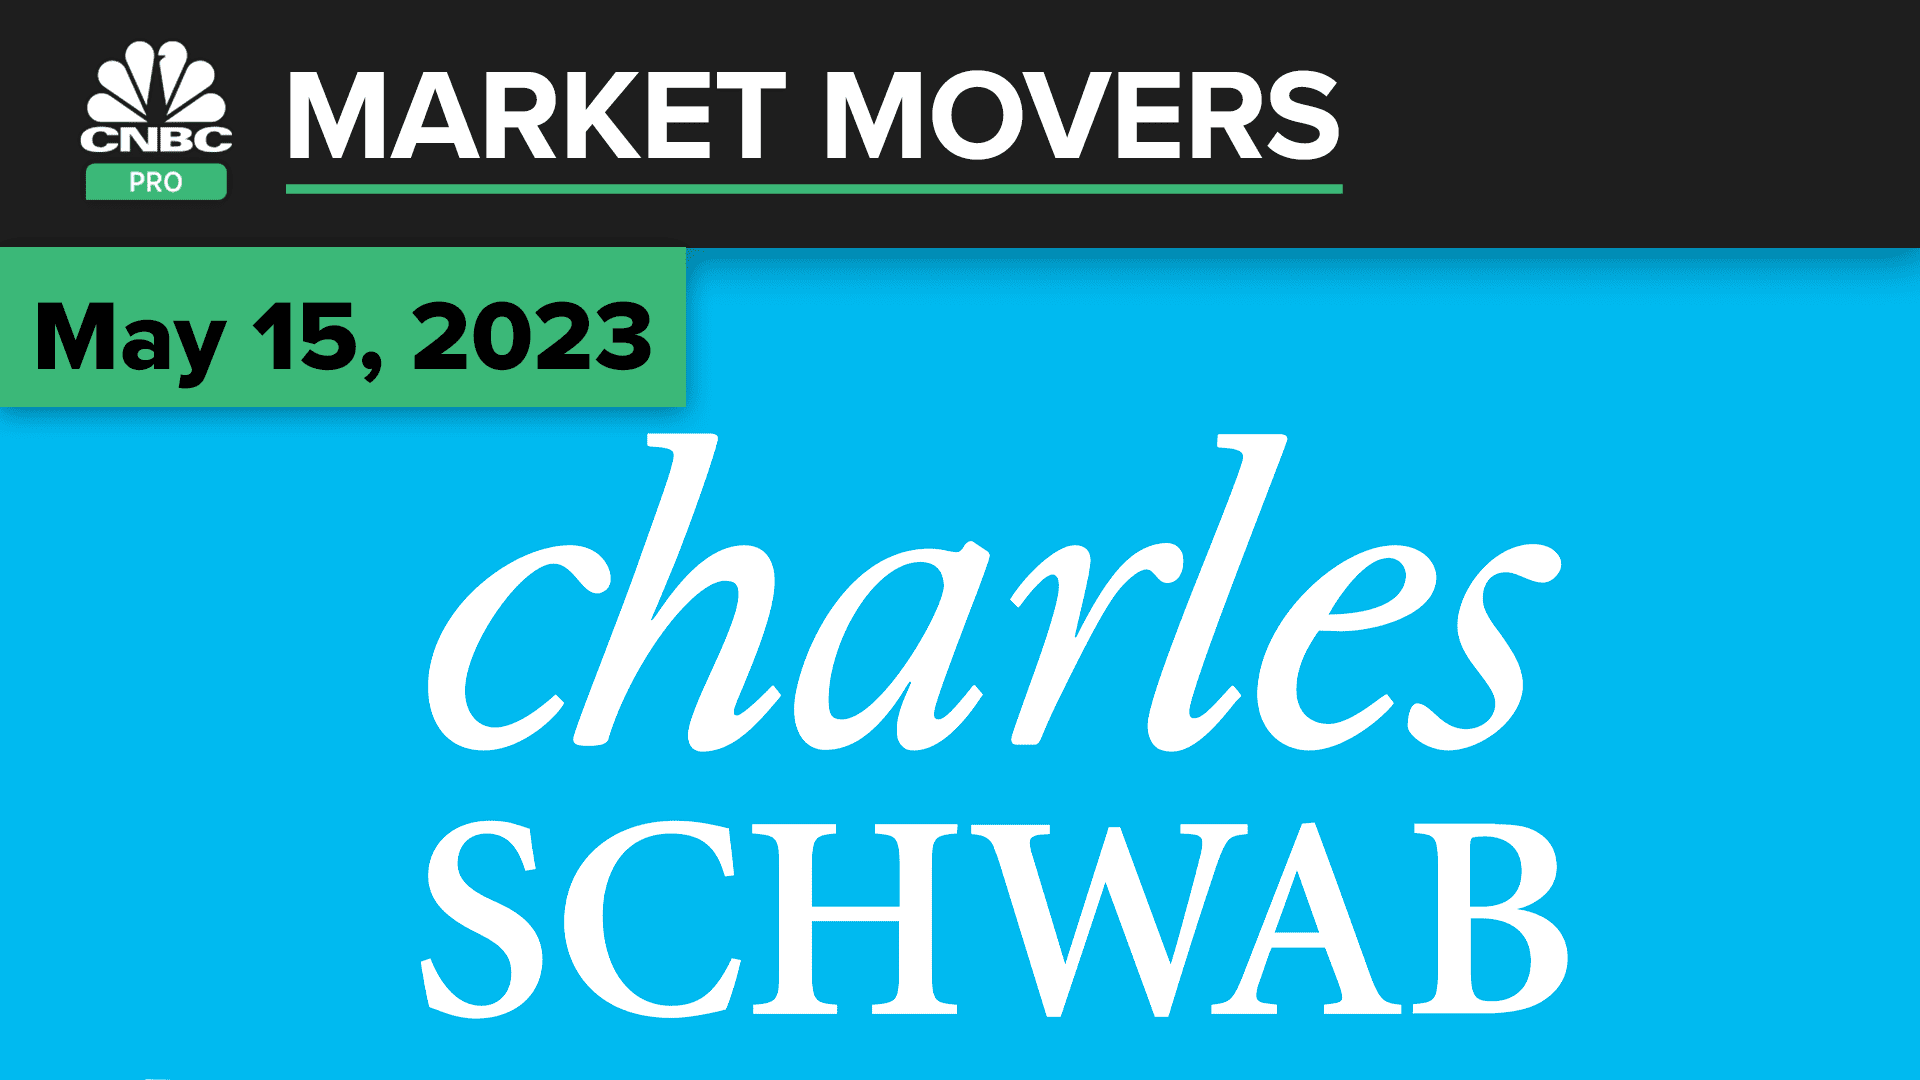 Charles Schwab shares rise after an upgrade. Here's what the experts should do next